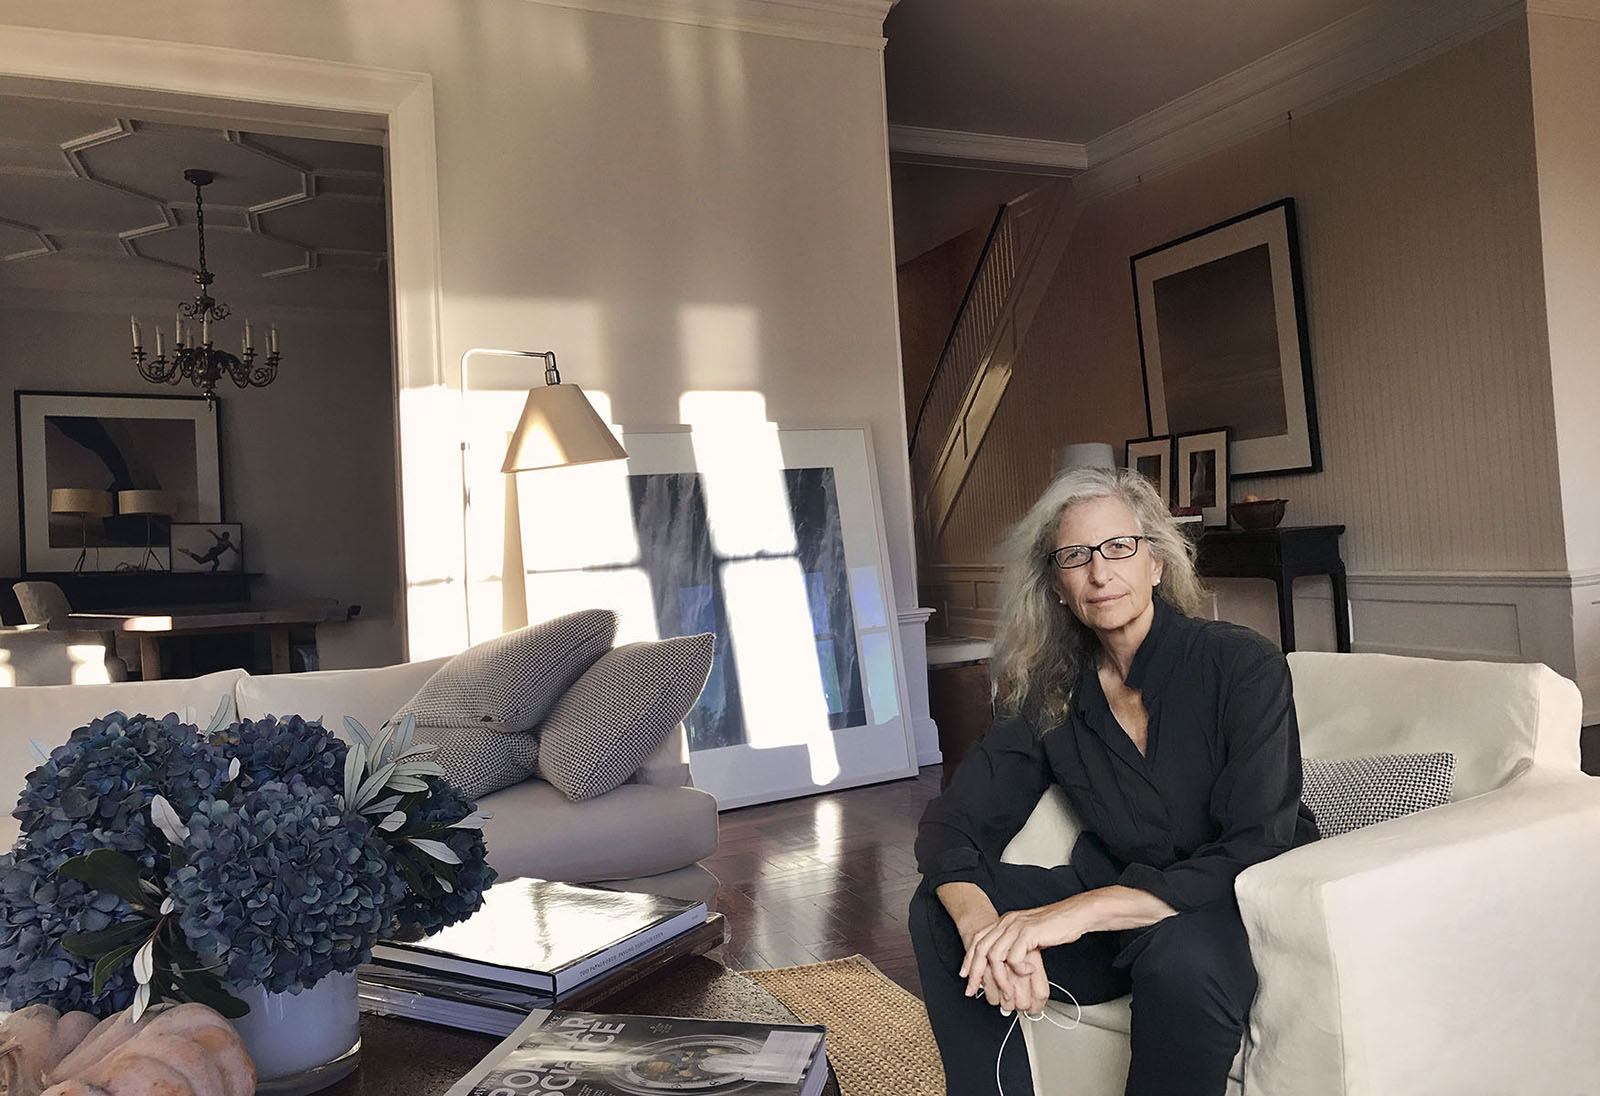 Annie Leibovitz photographed in a living room.